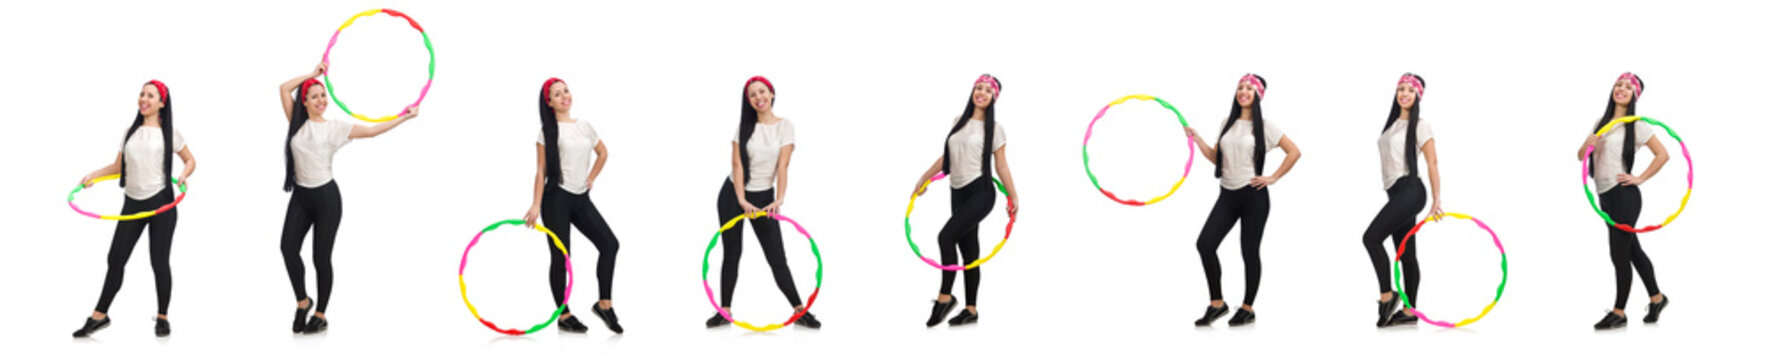 A Girl In Sport Suit With Hula Hoop Isolated On White